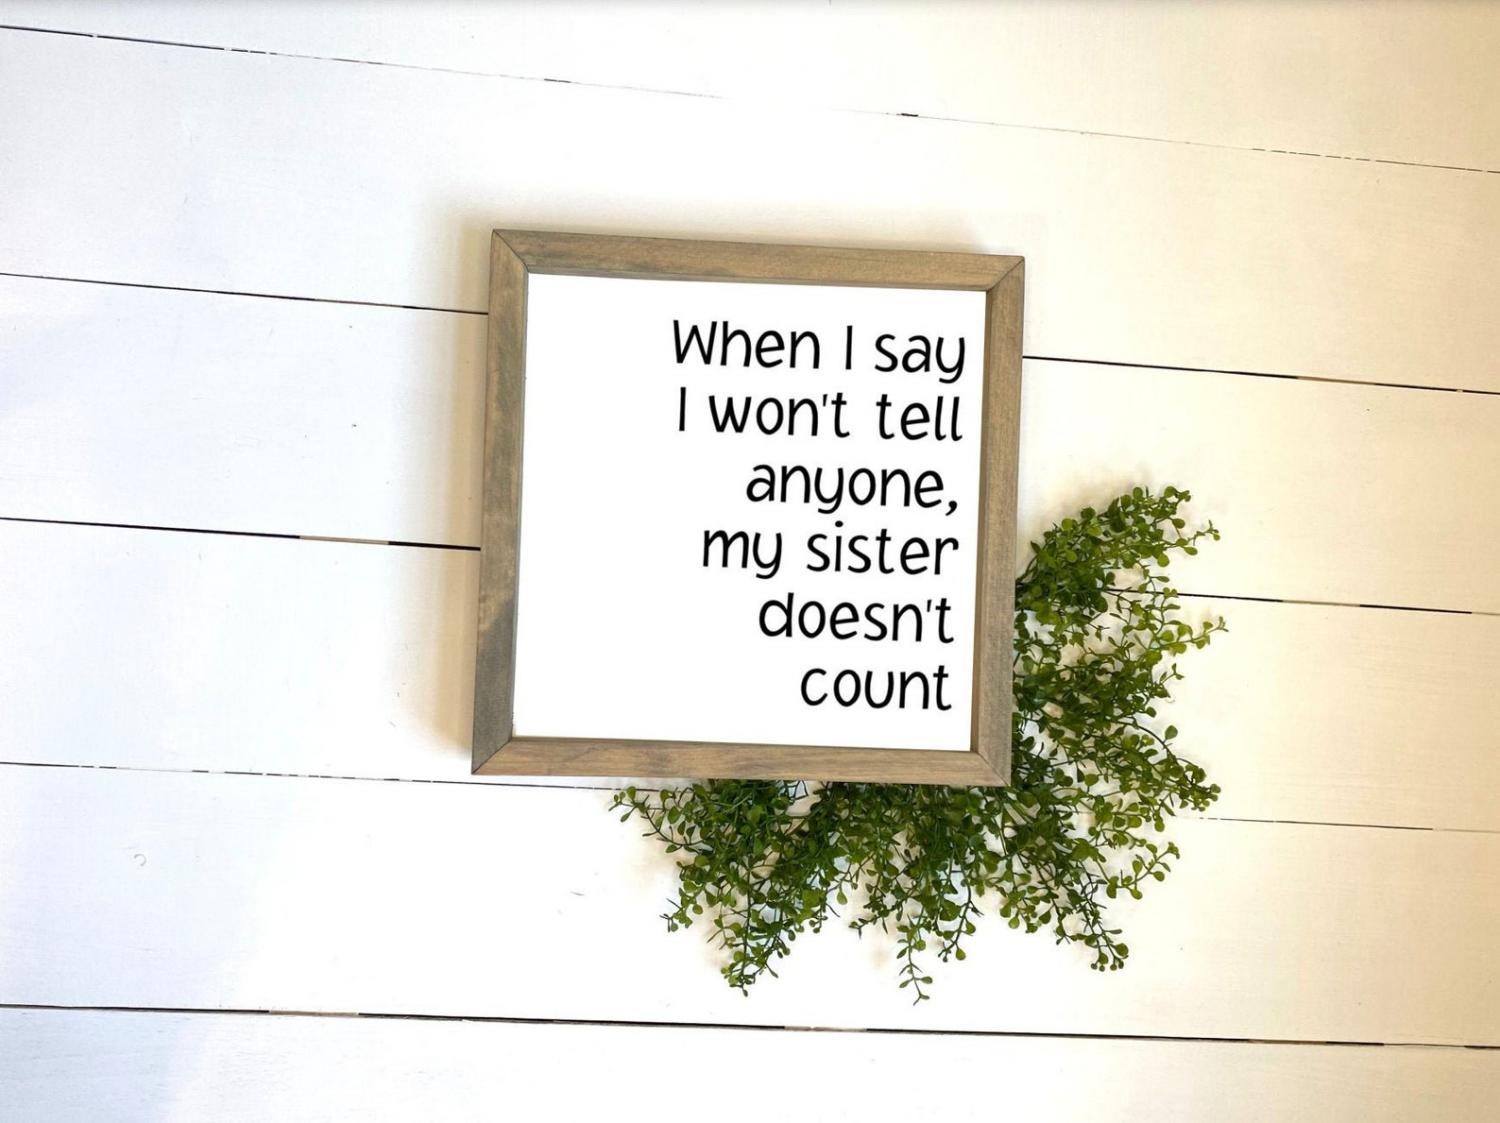 When I say I won't tell anyone, my sister doesn't count!